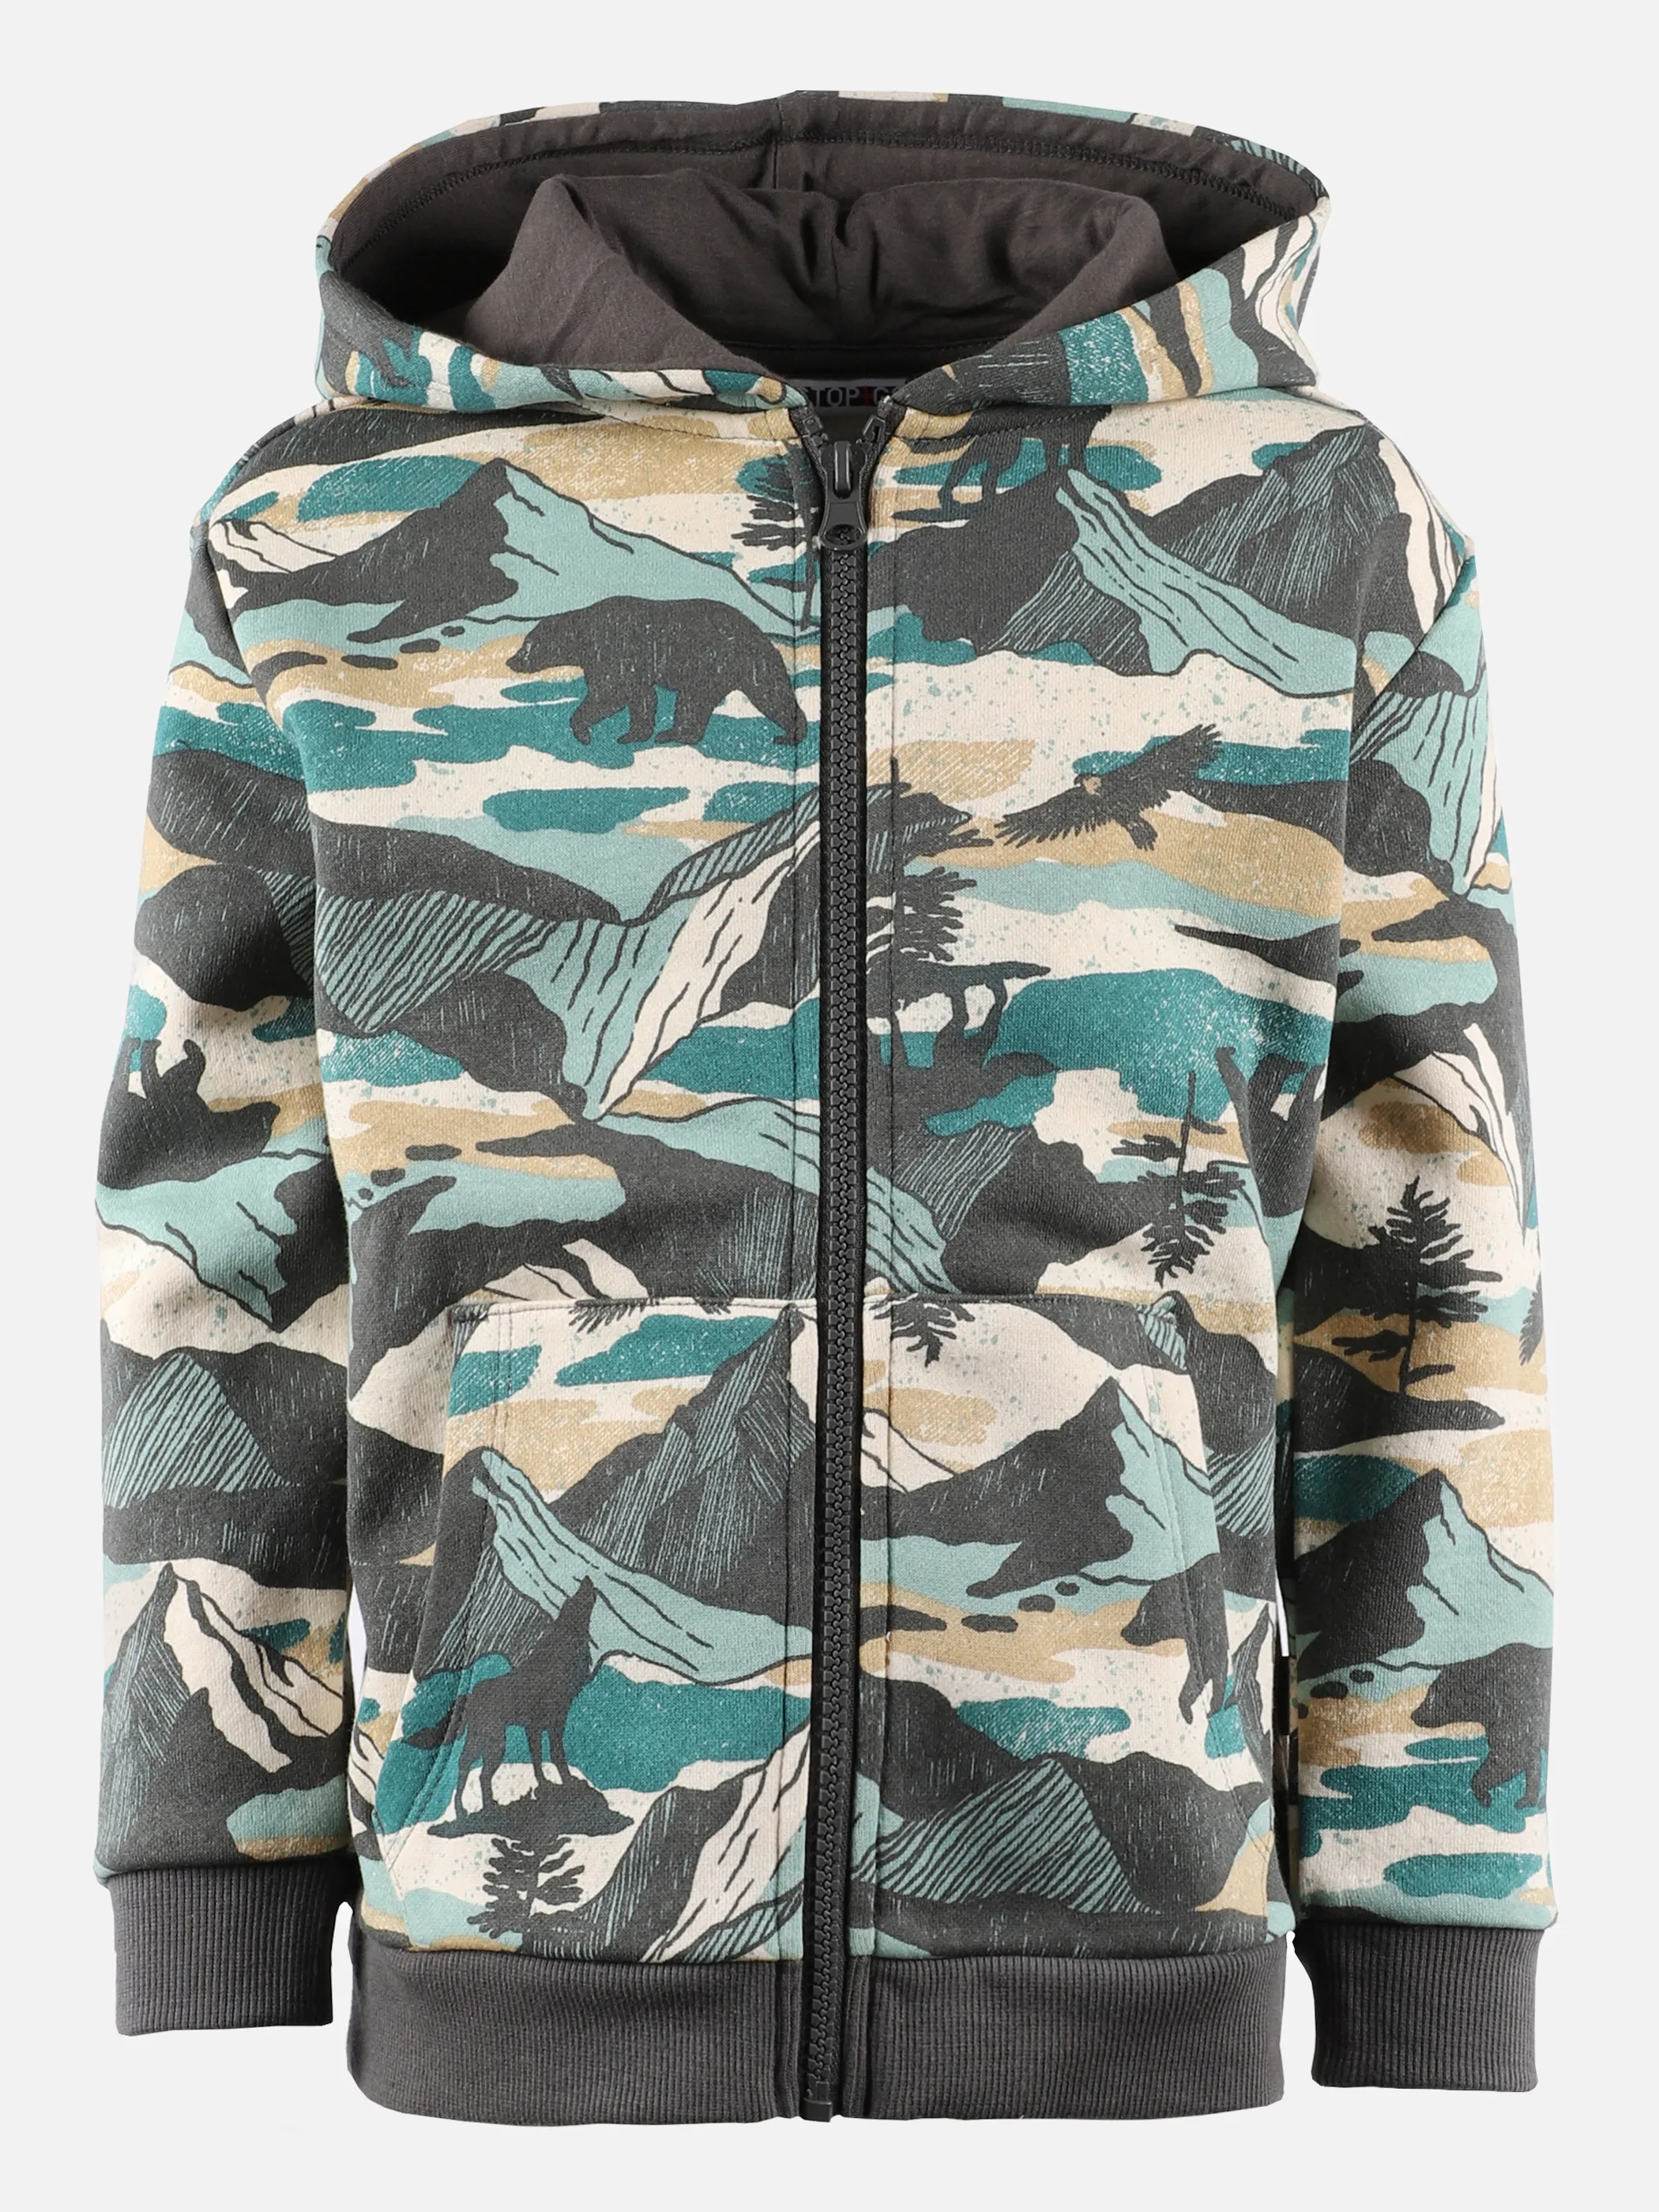 Stop + Go MB Hoodie in oliv Camouflage Grün 868308 OLIV 1